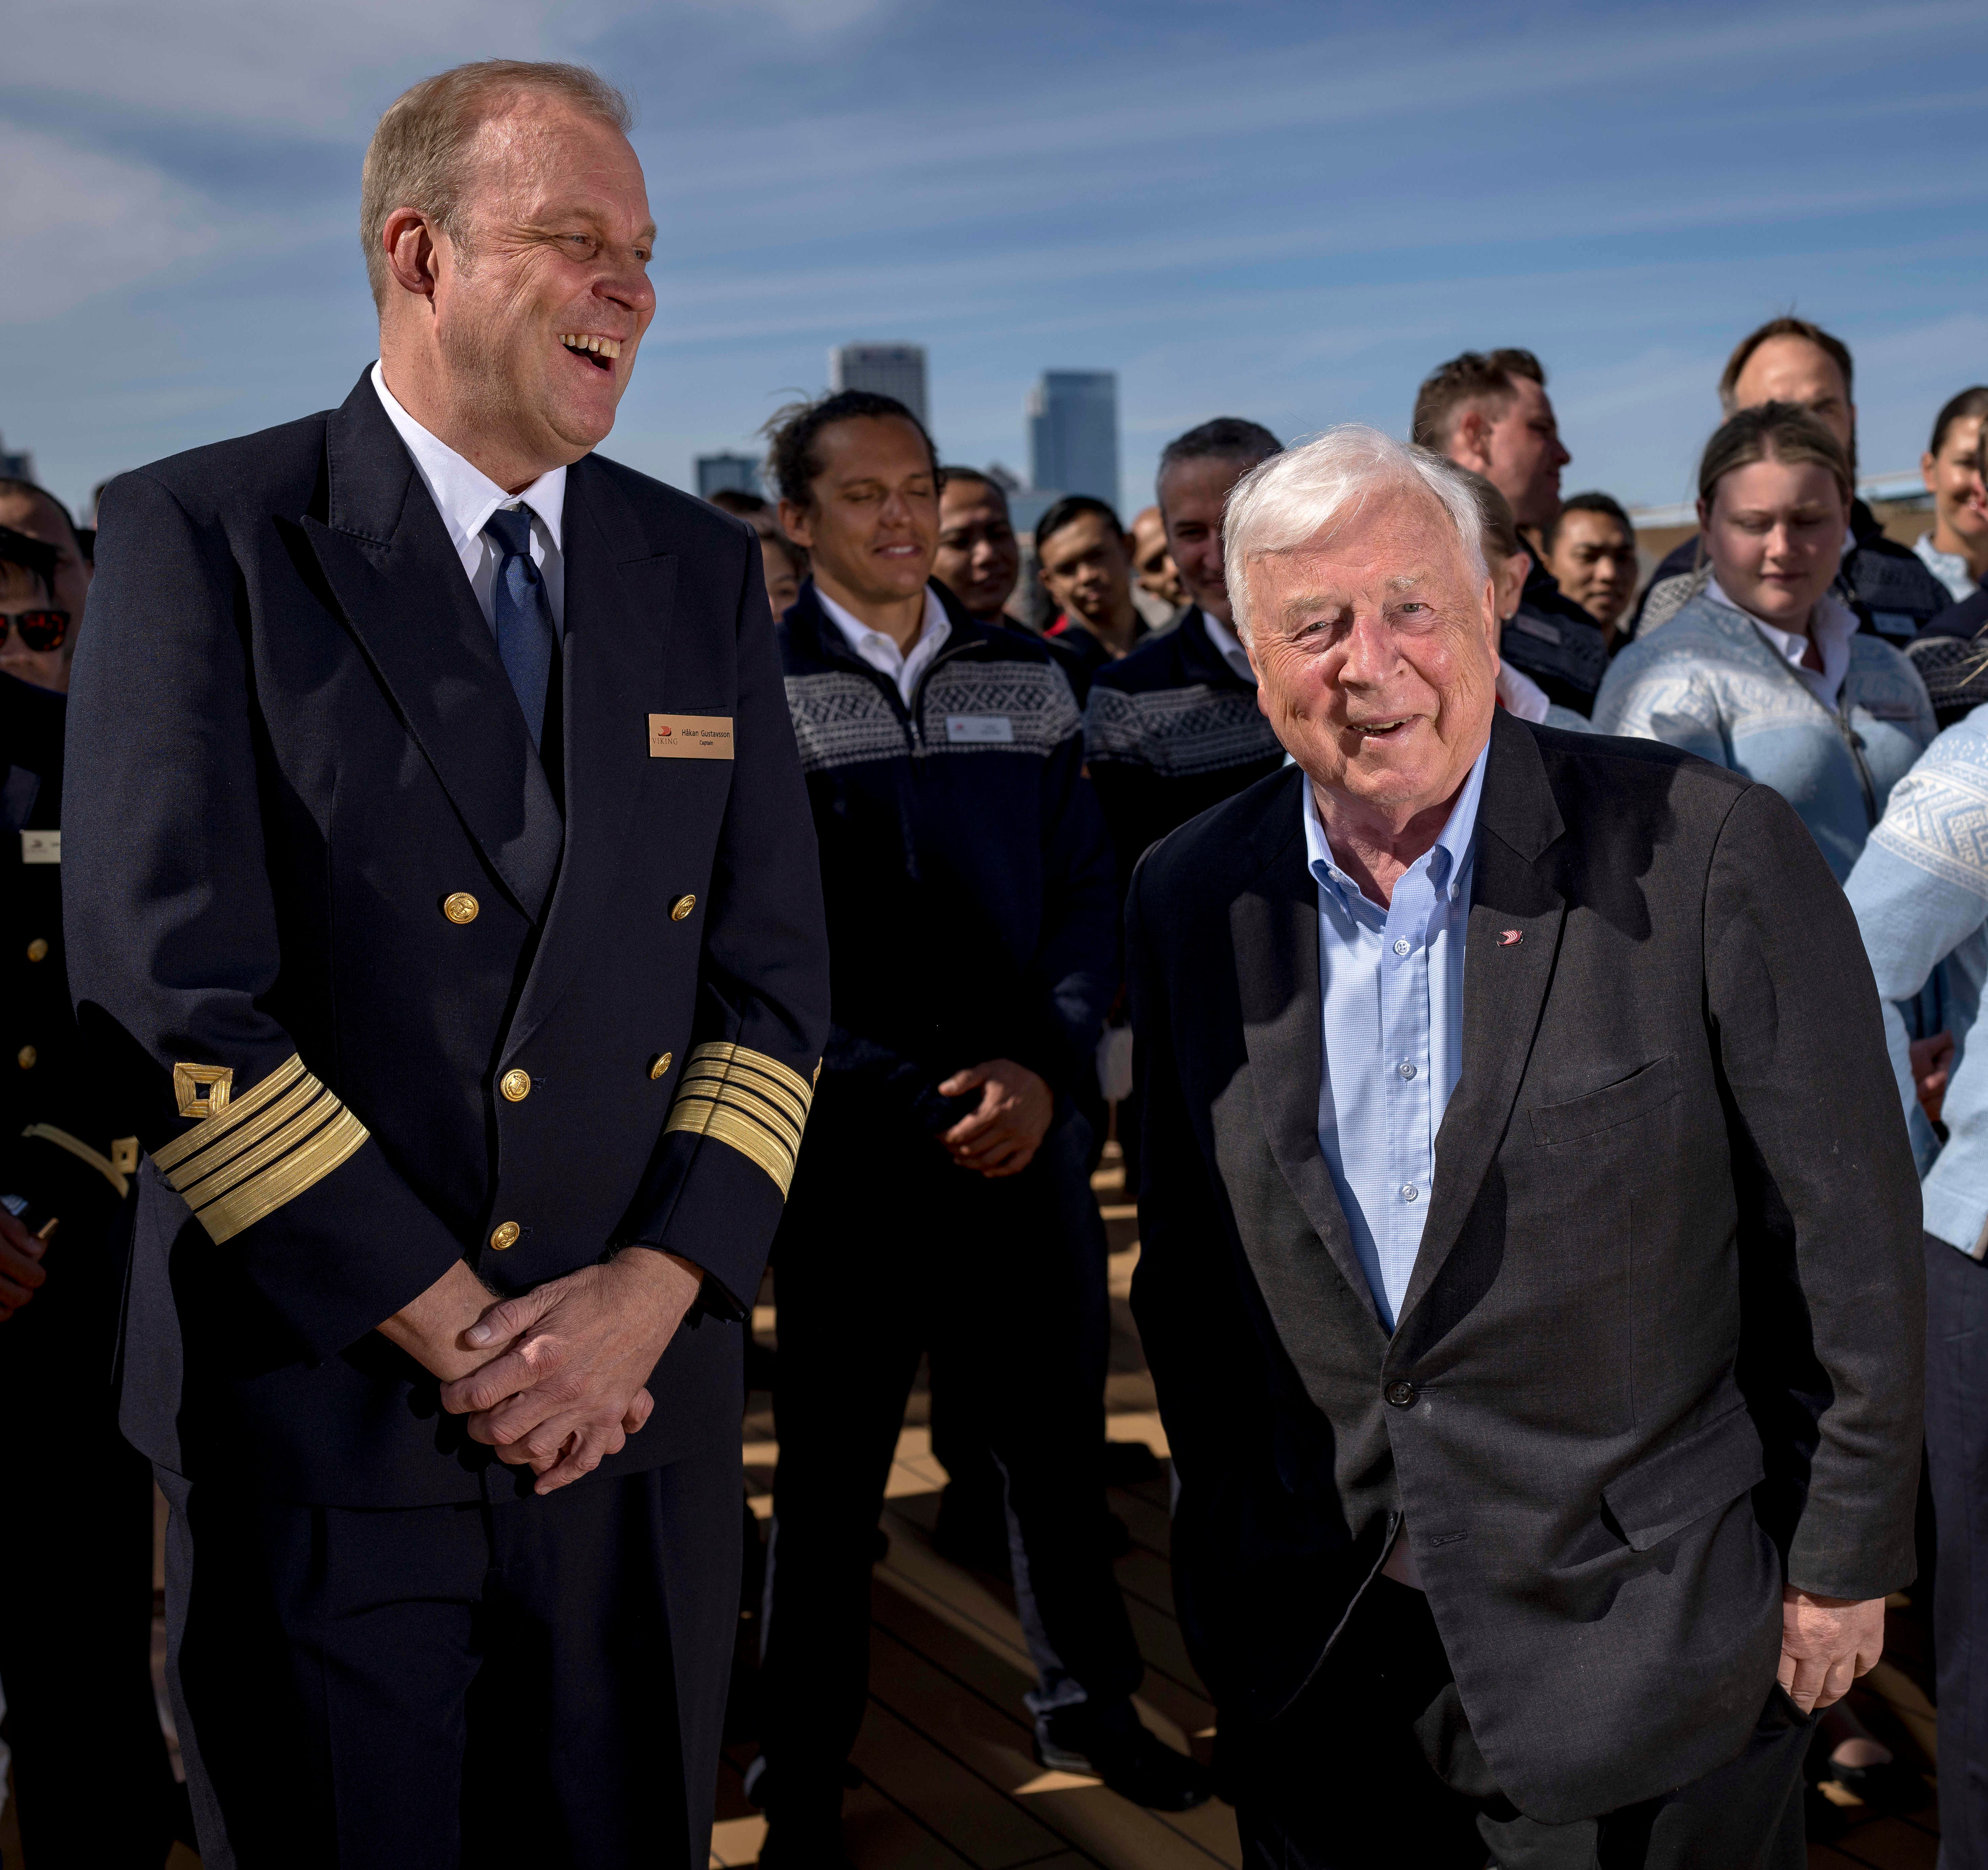 Captain Hakan Gustavsson, left, laughs with CEO of Viking Cruises Torstein Hagen before a group photo aboard the Viking Octantis as it leaves Milwaukee to traverse Lake Michigan.